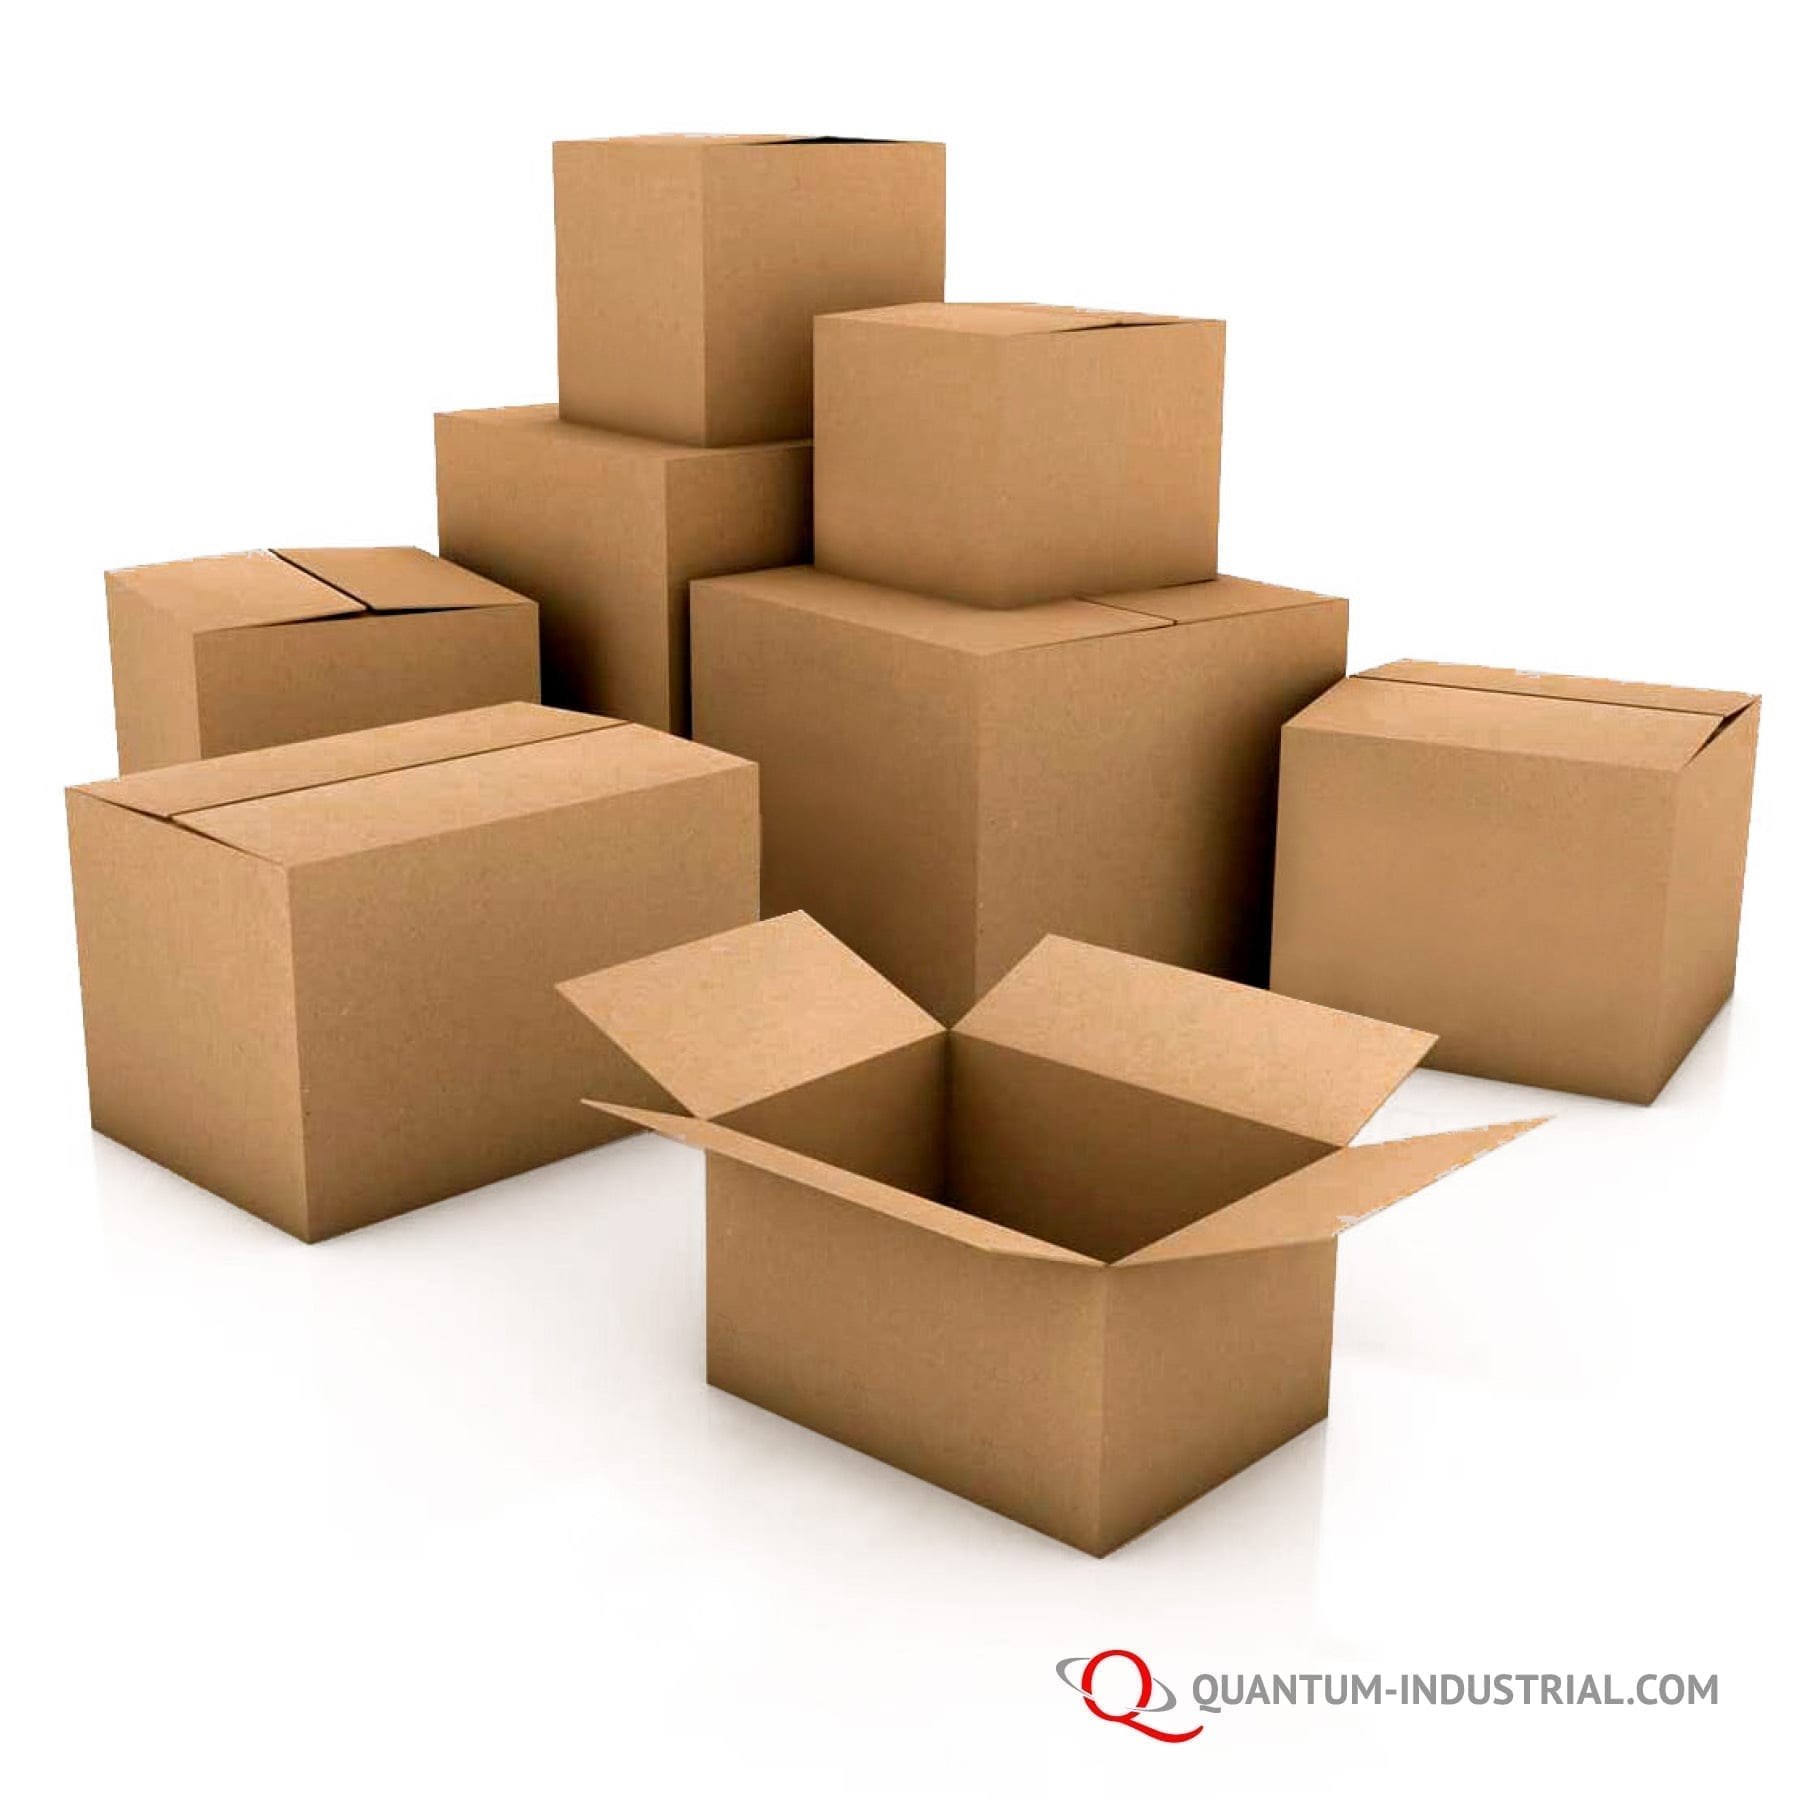 25 17x13x13 Cardboard Shipping Boxes Cartons Packing Moving Mailing Box 